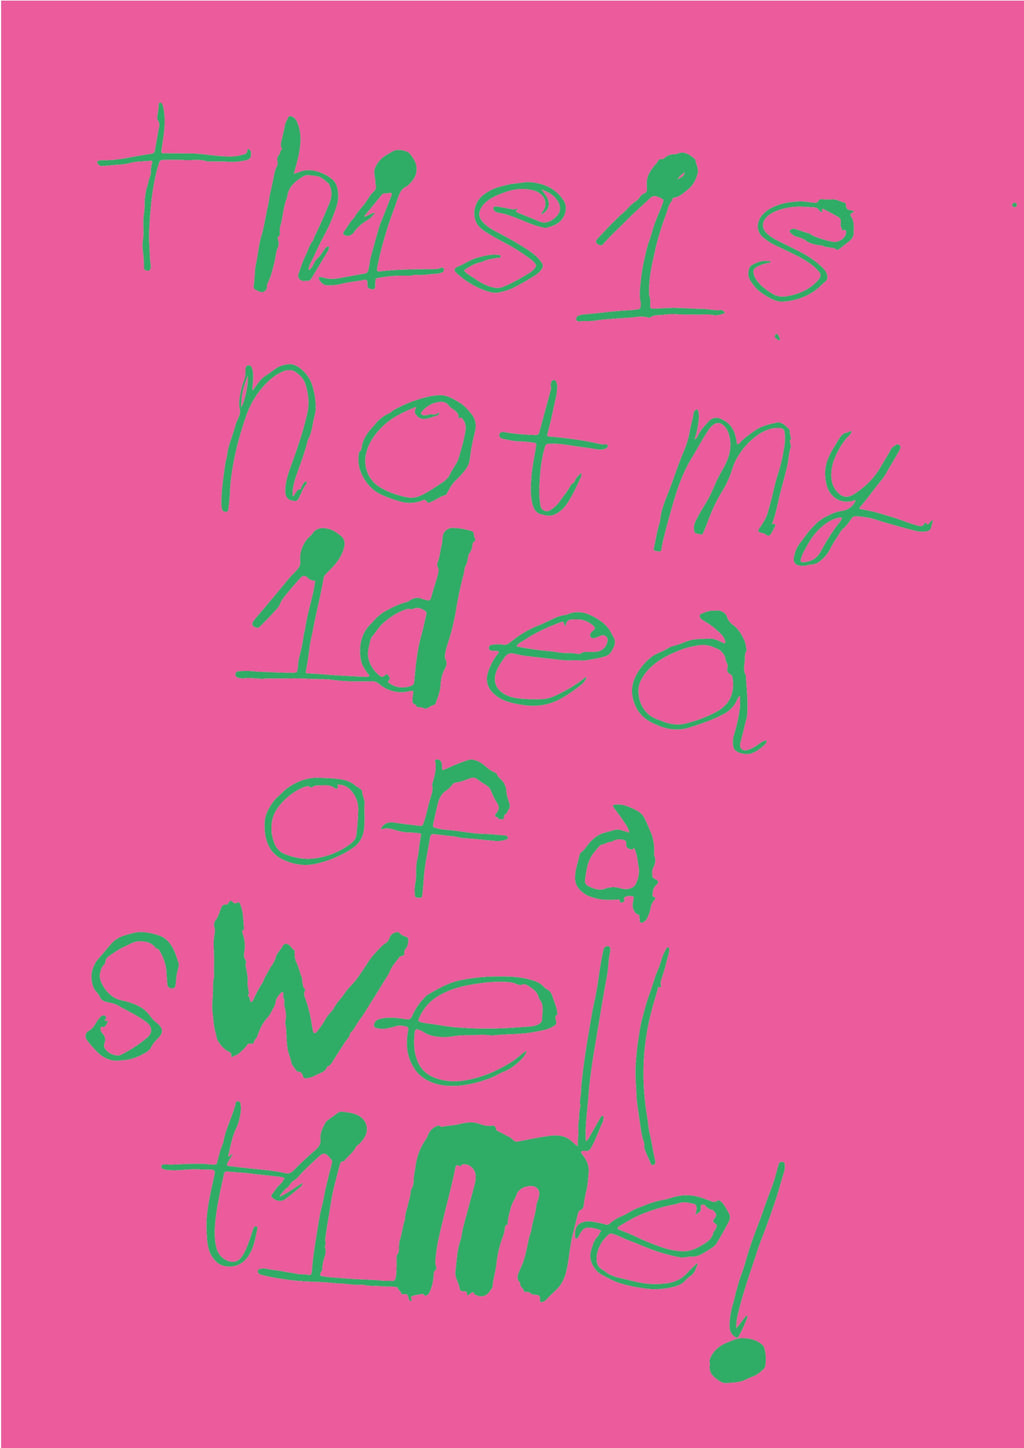 Neon green text on a fuchsia pink background.  The digital print note is handwritten by Piper a teenage artist from Hackney who is deaf and autistic.  Her unique font has lots of big dots and letters that are more bold.  She uses a mix of lower and capital letters within her words